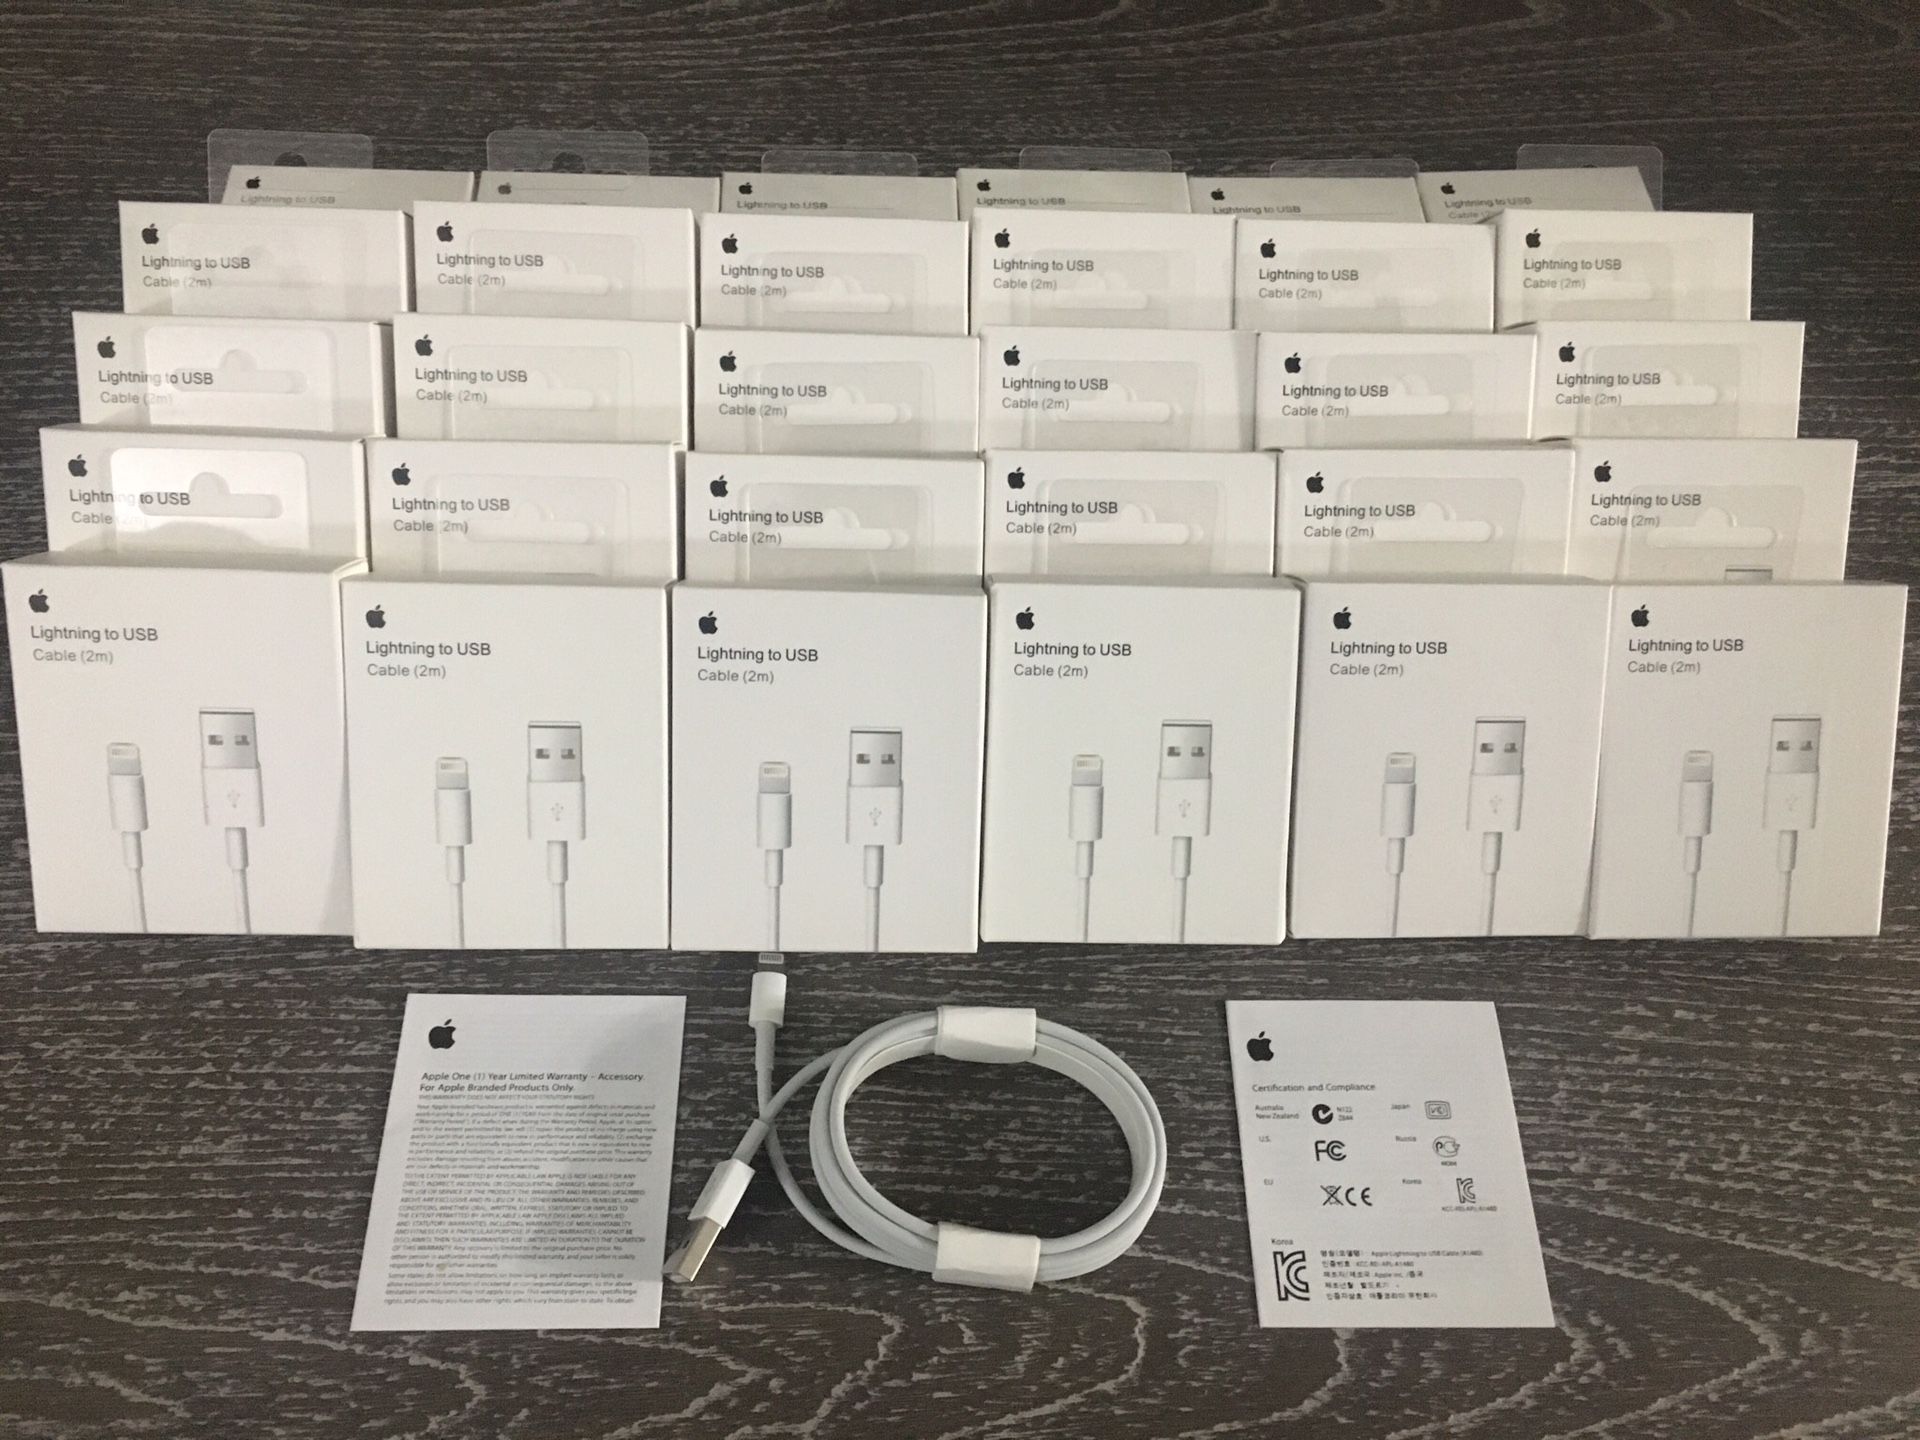 5 Apple Lightening Cables (6ft long)